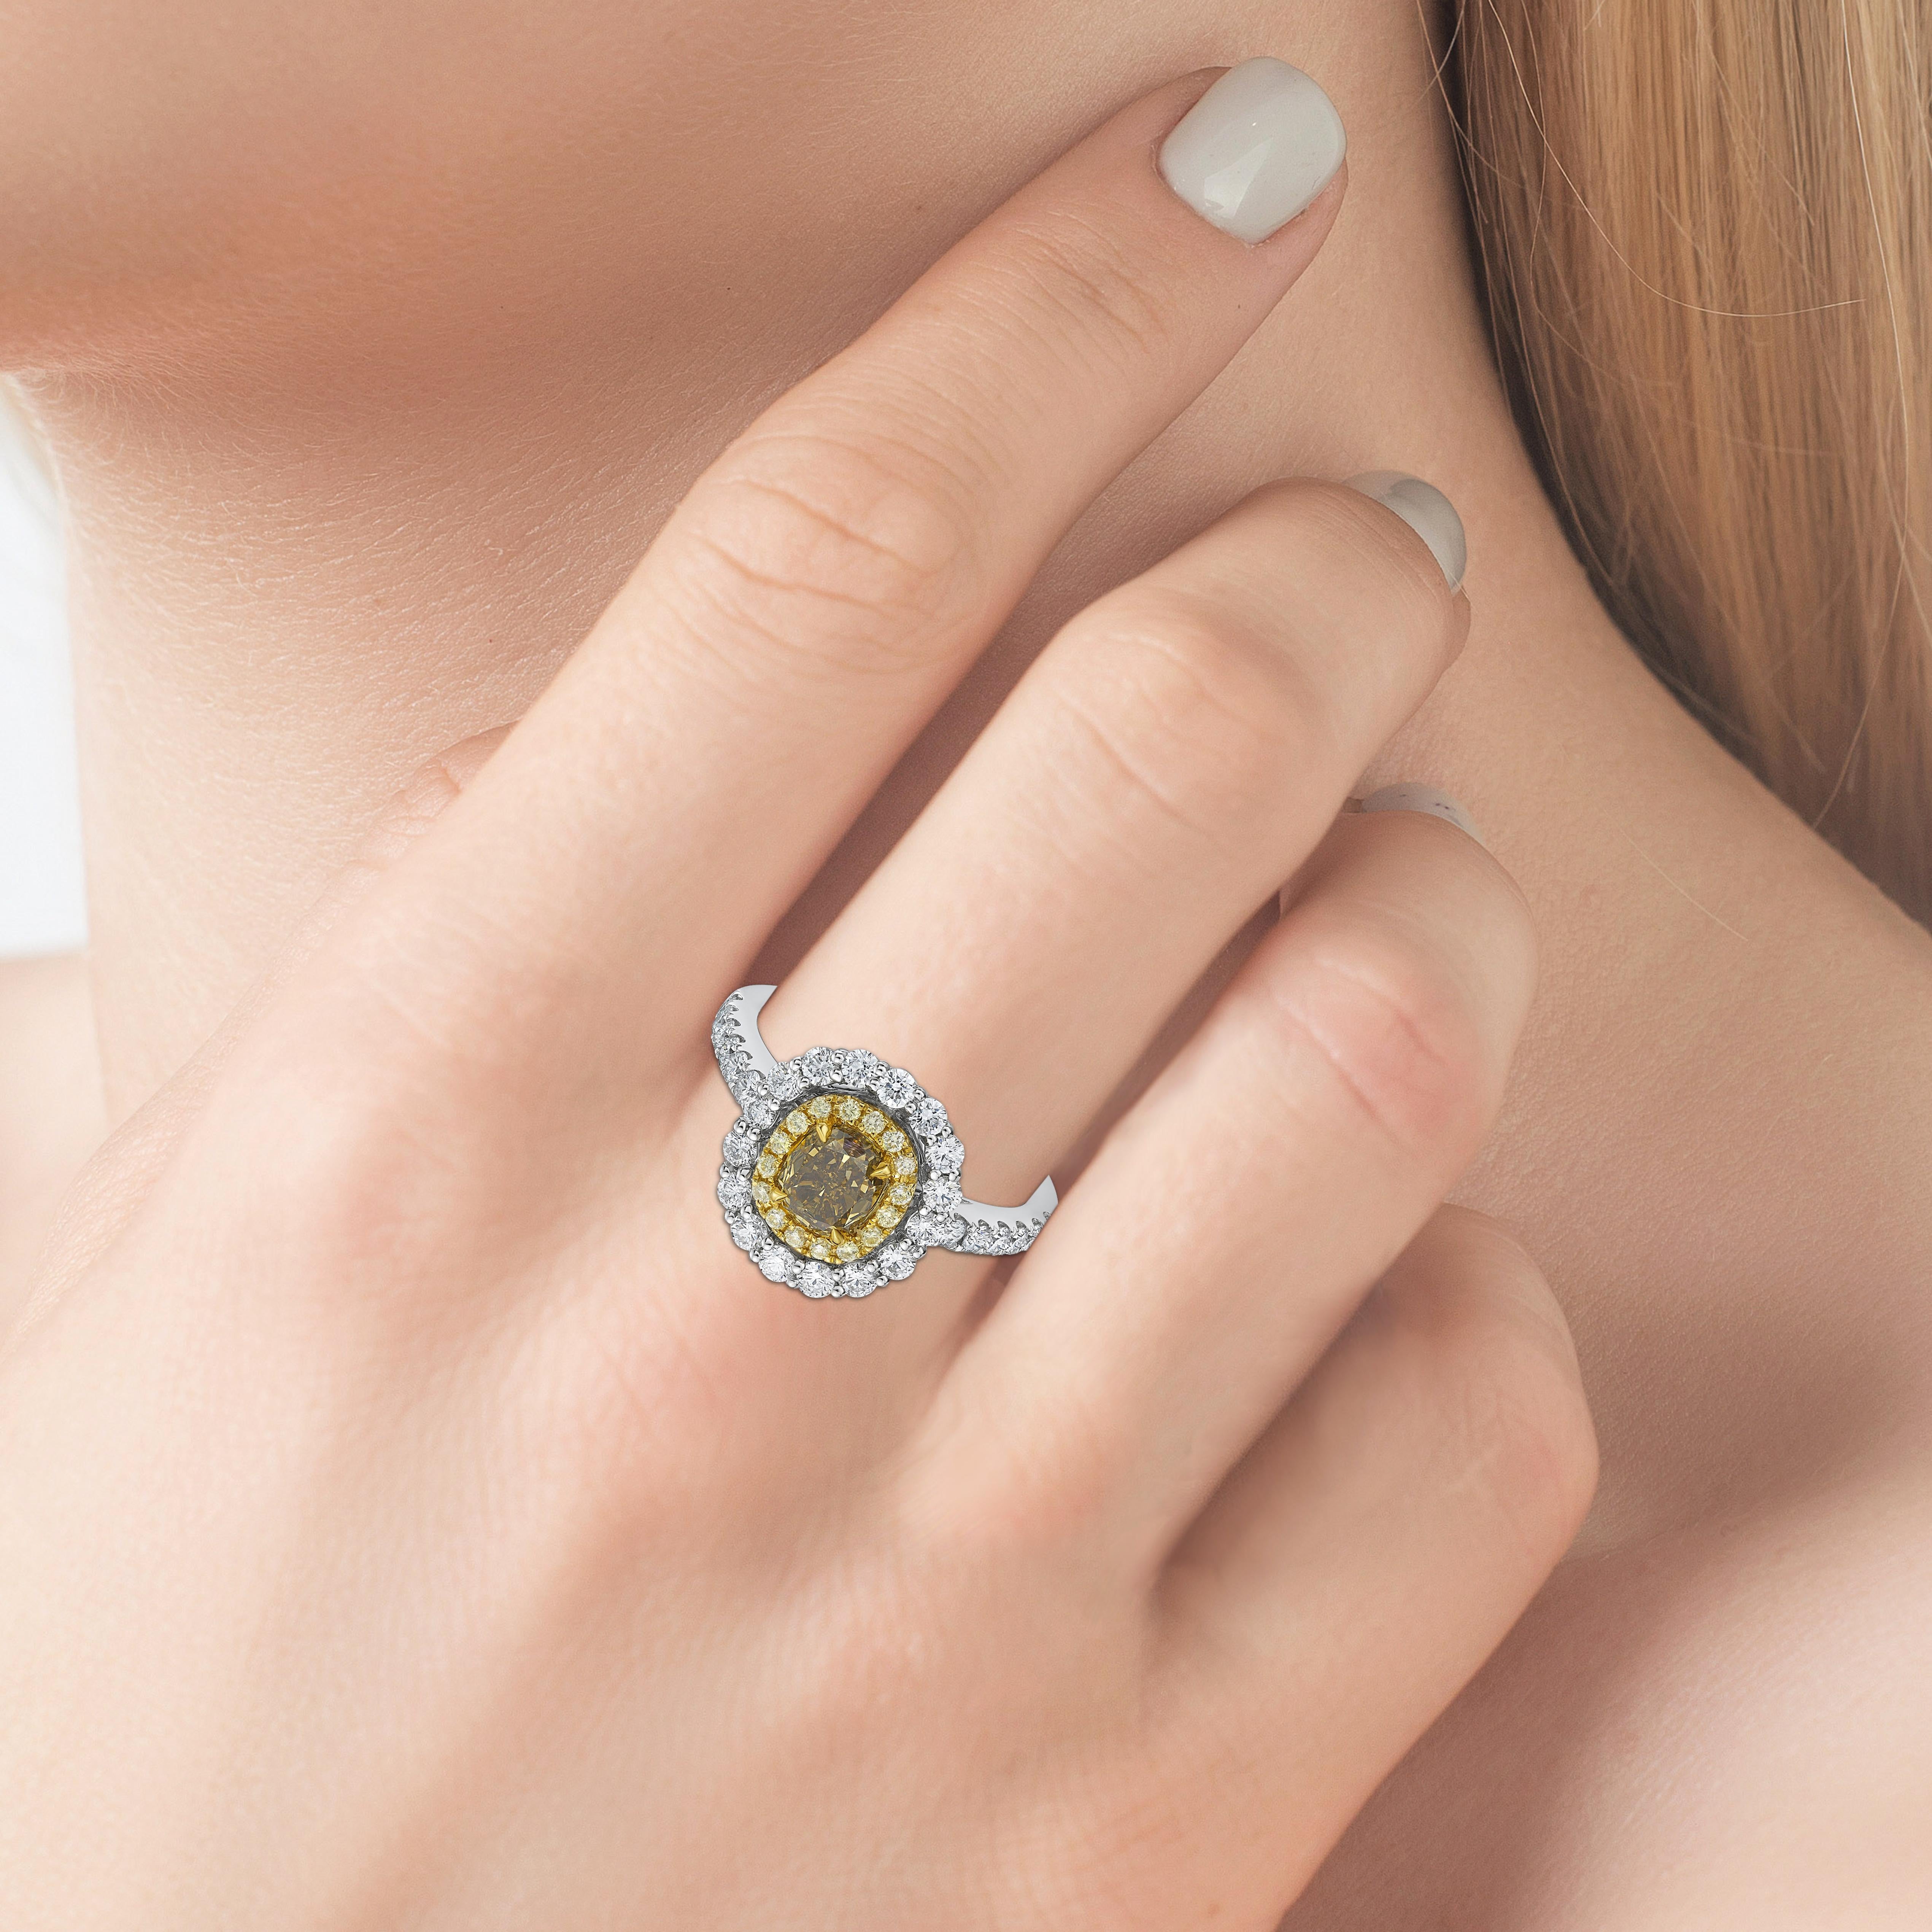 Everyday Classic designed ring featuring a  1.15 carat Modified cushion cut Fancy Deep Brownish Greenish Yellow Diamond with white and yellow diamond halo finished in white gold. 

Center stone certified by world wide known GIA institution.